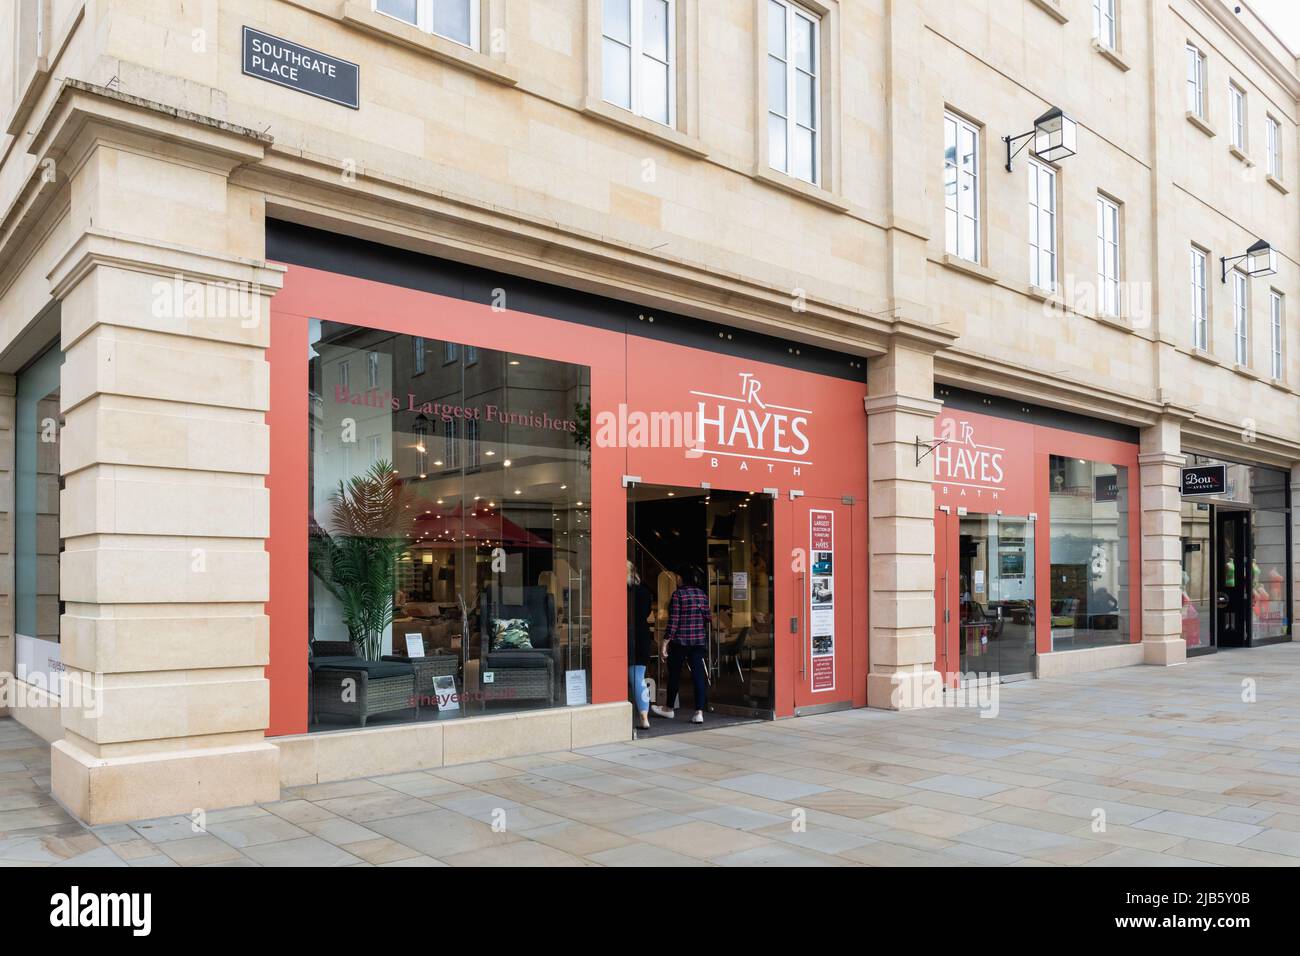 TR Hayes - Bath's Largest Furnishers has a temporary pop-up shop in Southgate Shopping Centre, City of Bath. Somerset, England, UK Stock Photo